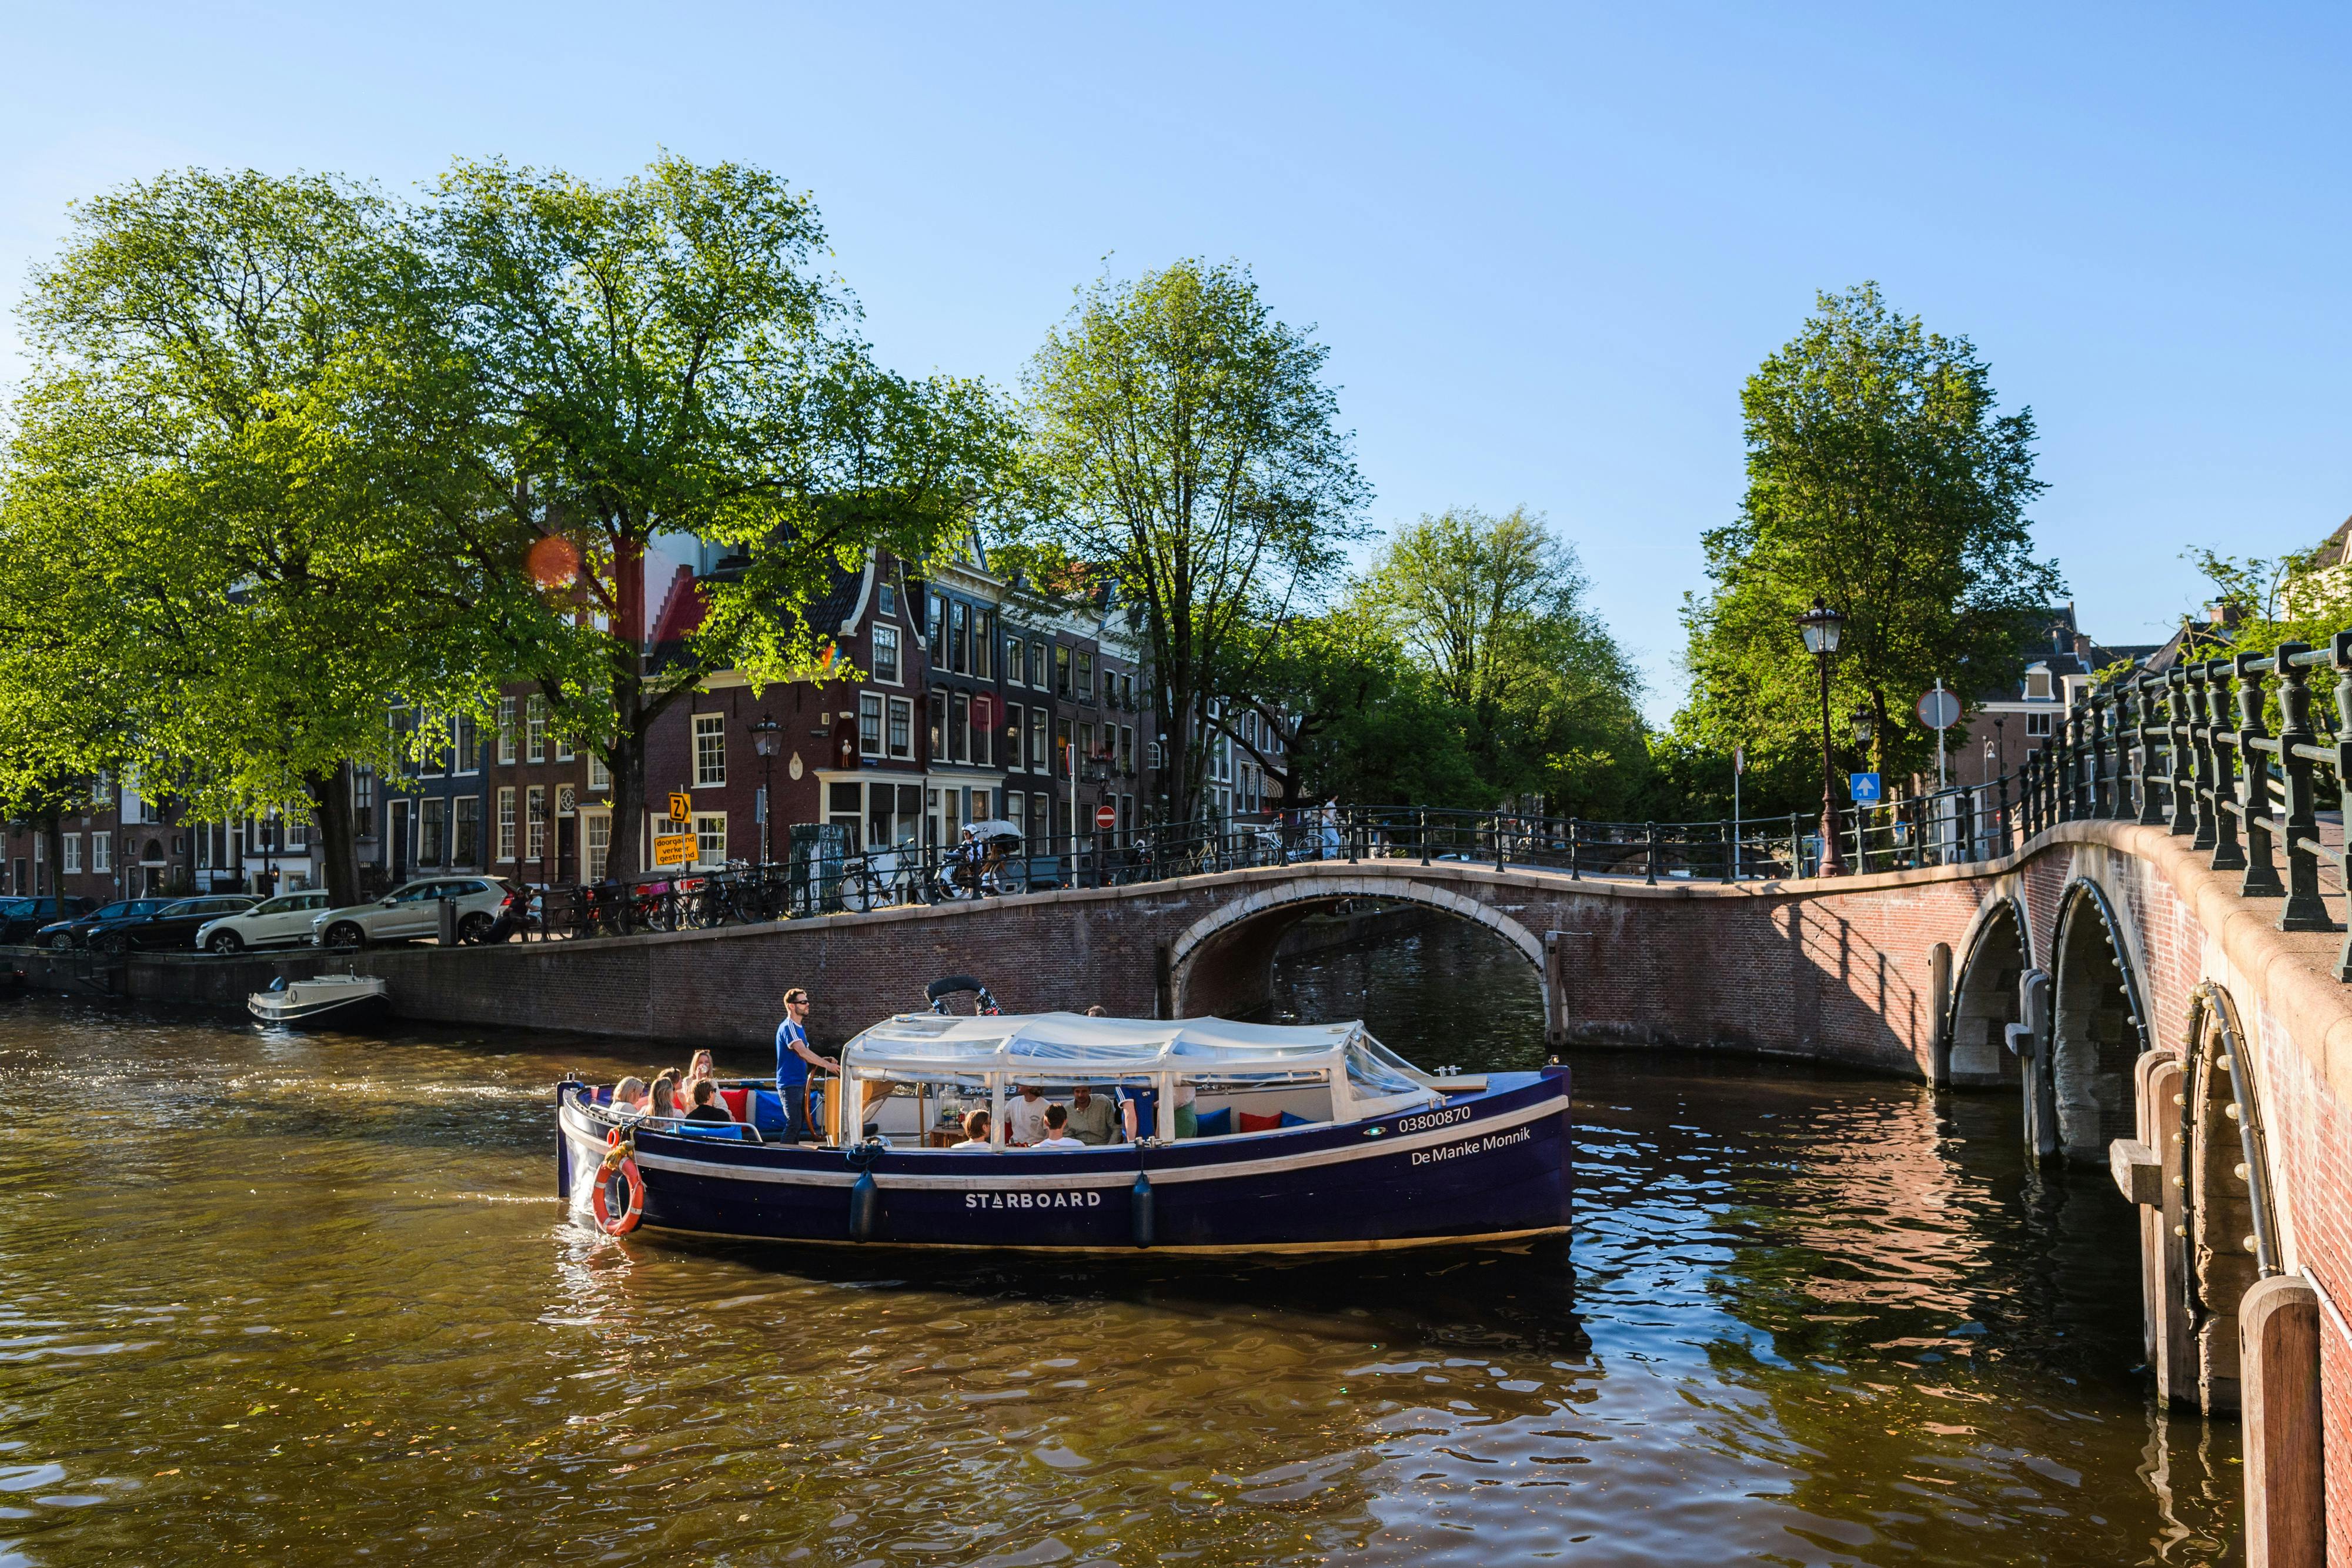 Private Amsterdam canals cruise with open bar